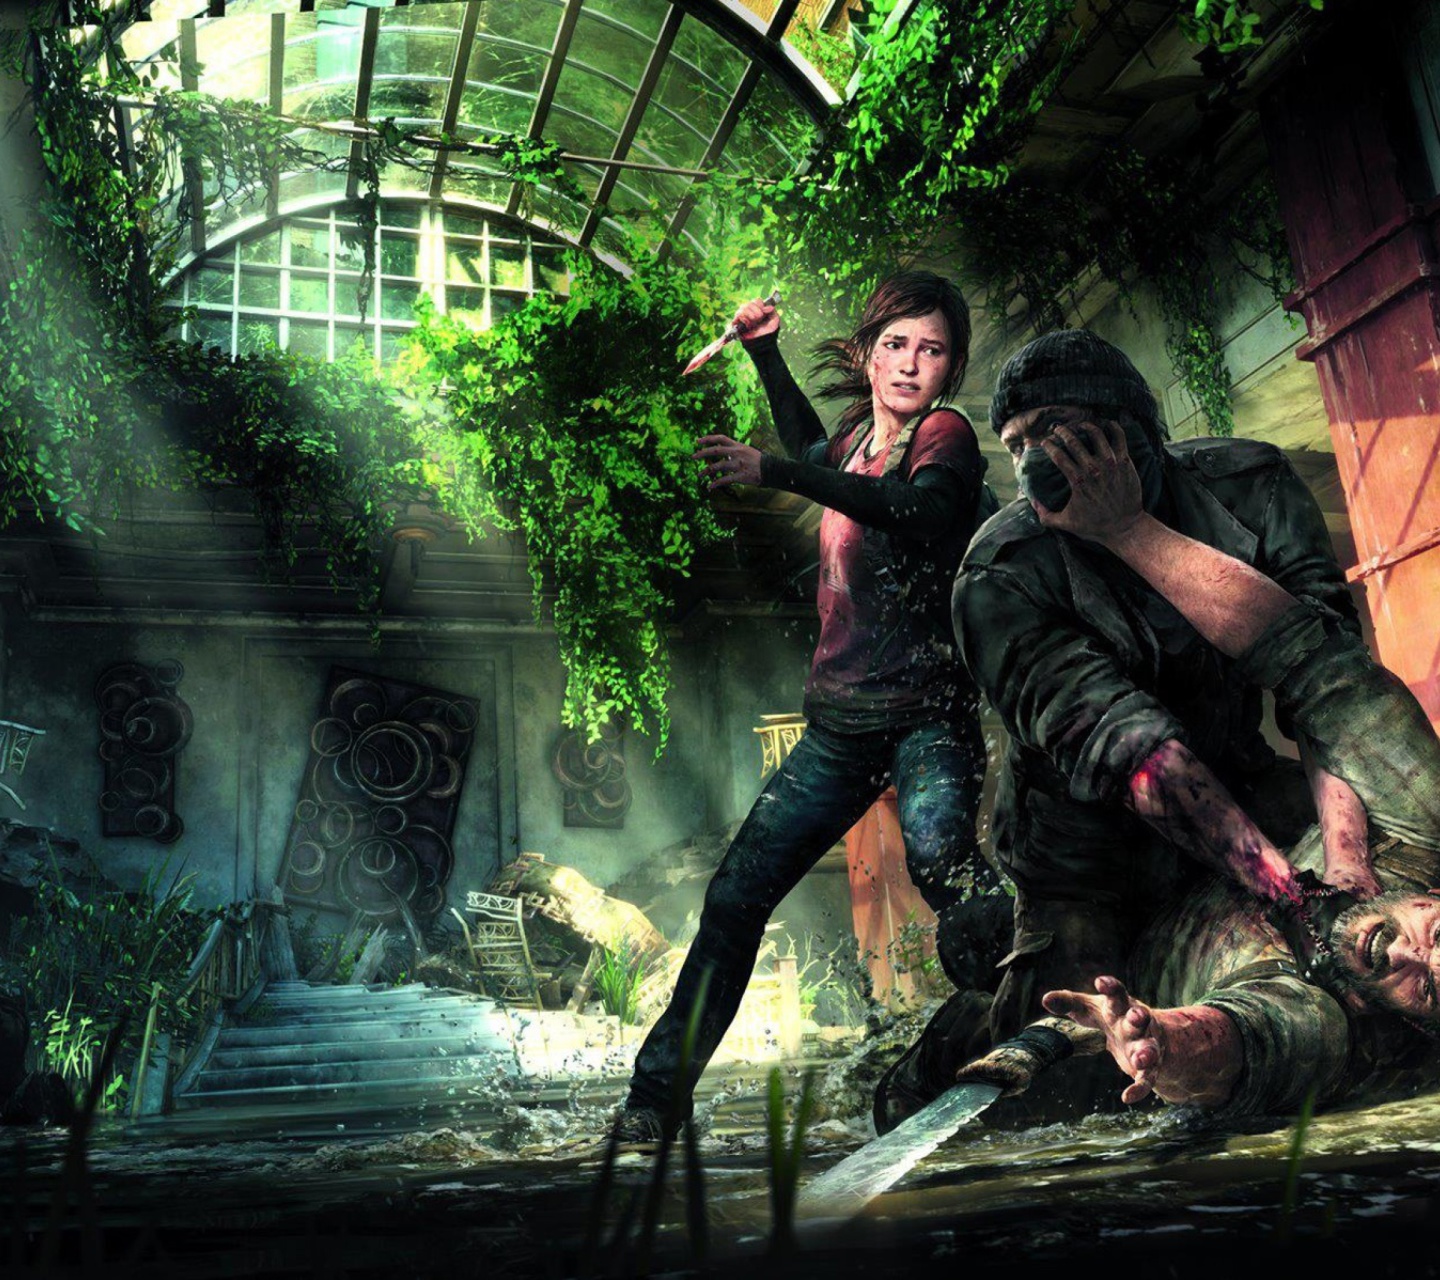 The Last Of Us Naughty Dog for Playstation 3 screenshot #1 1440x1280